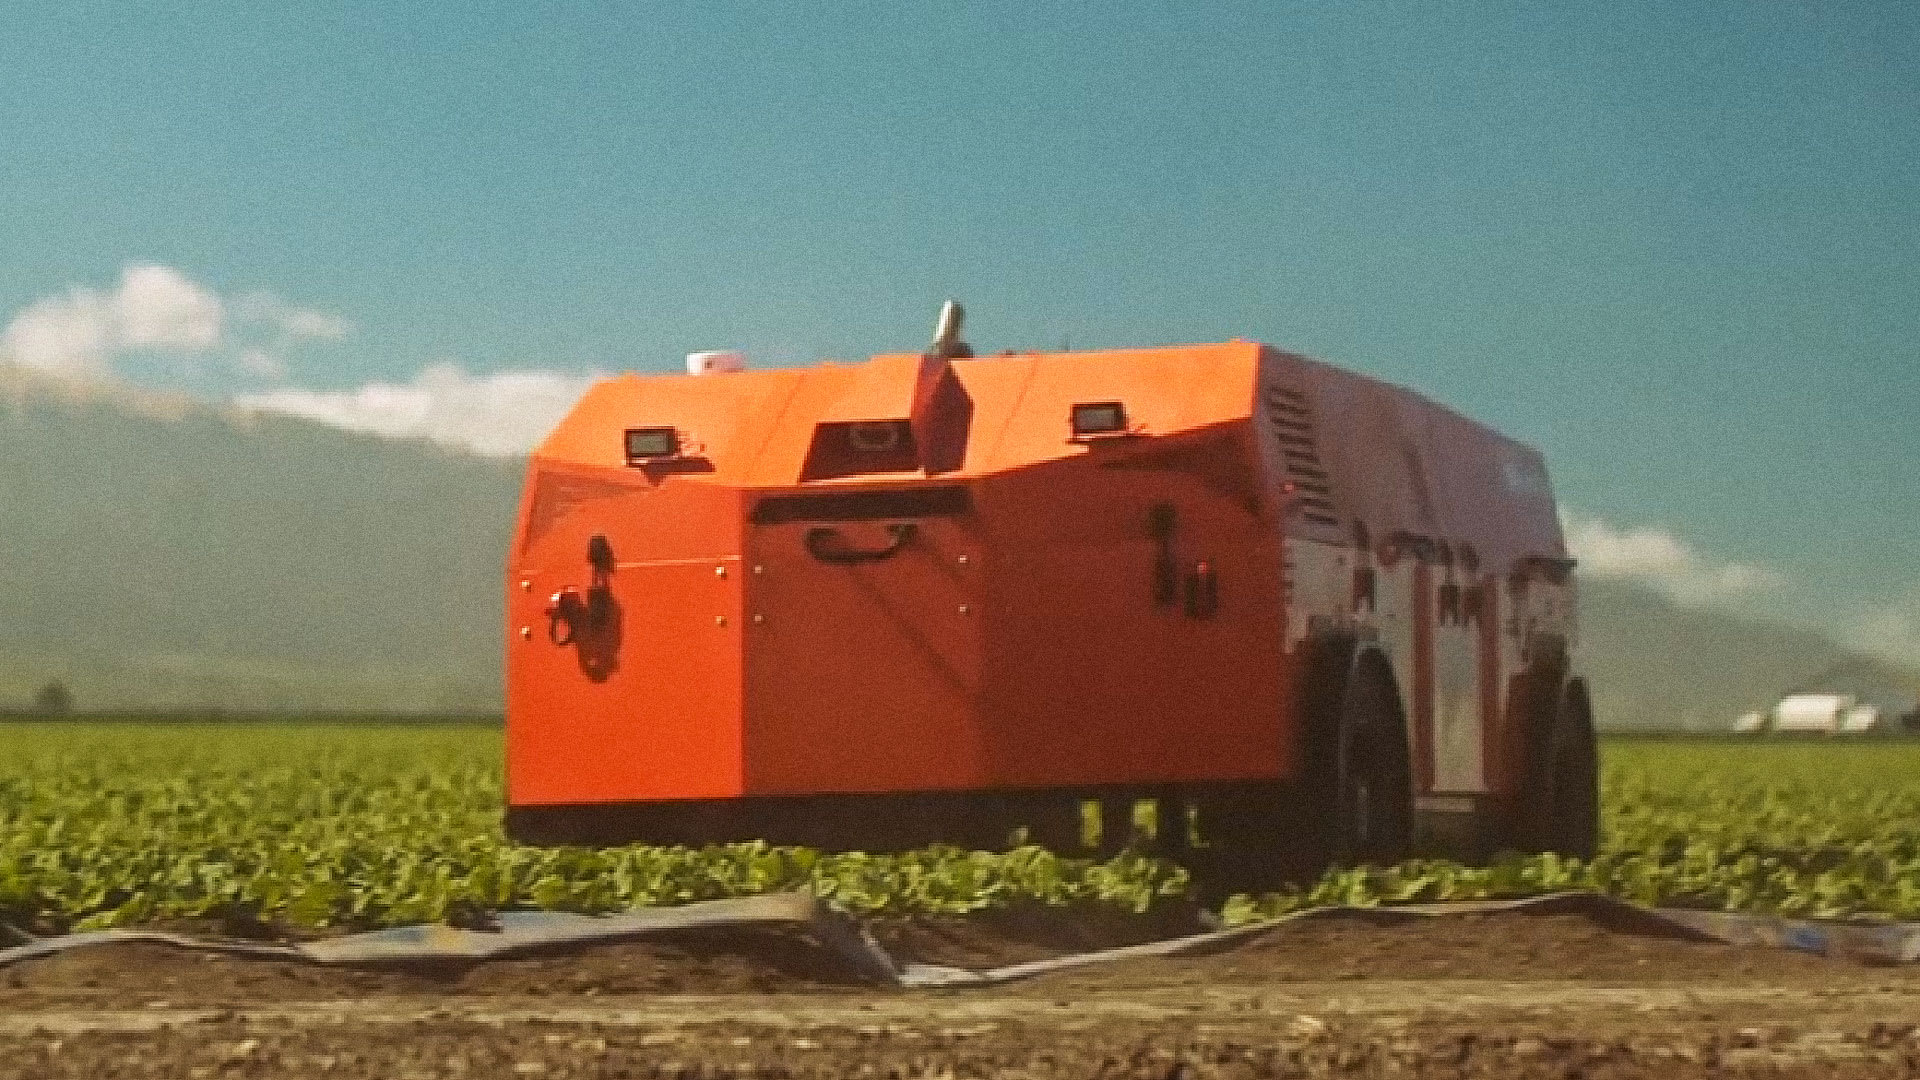 These giant robots are death machines for weeds